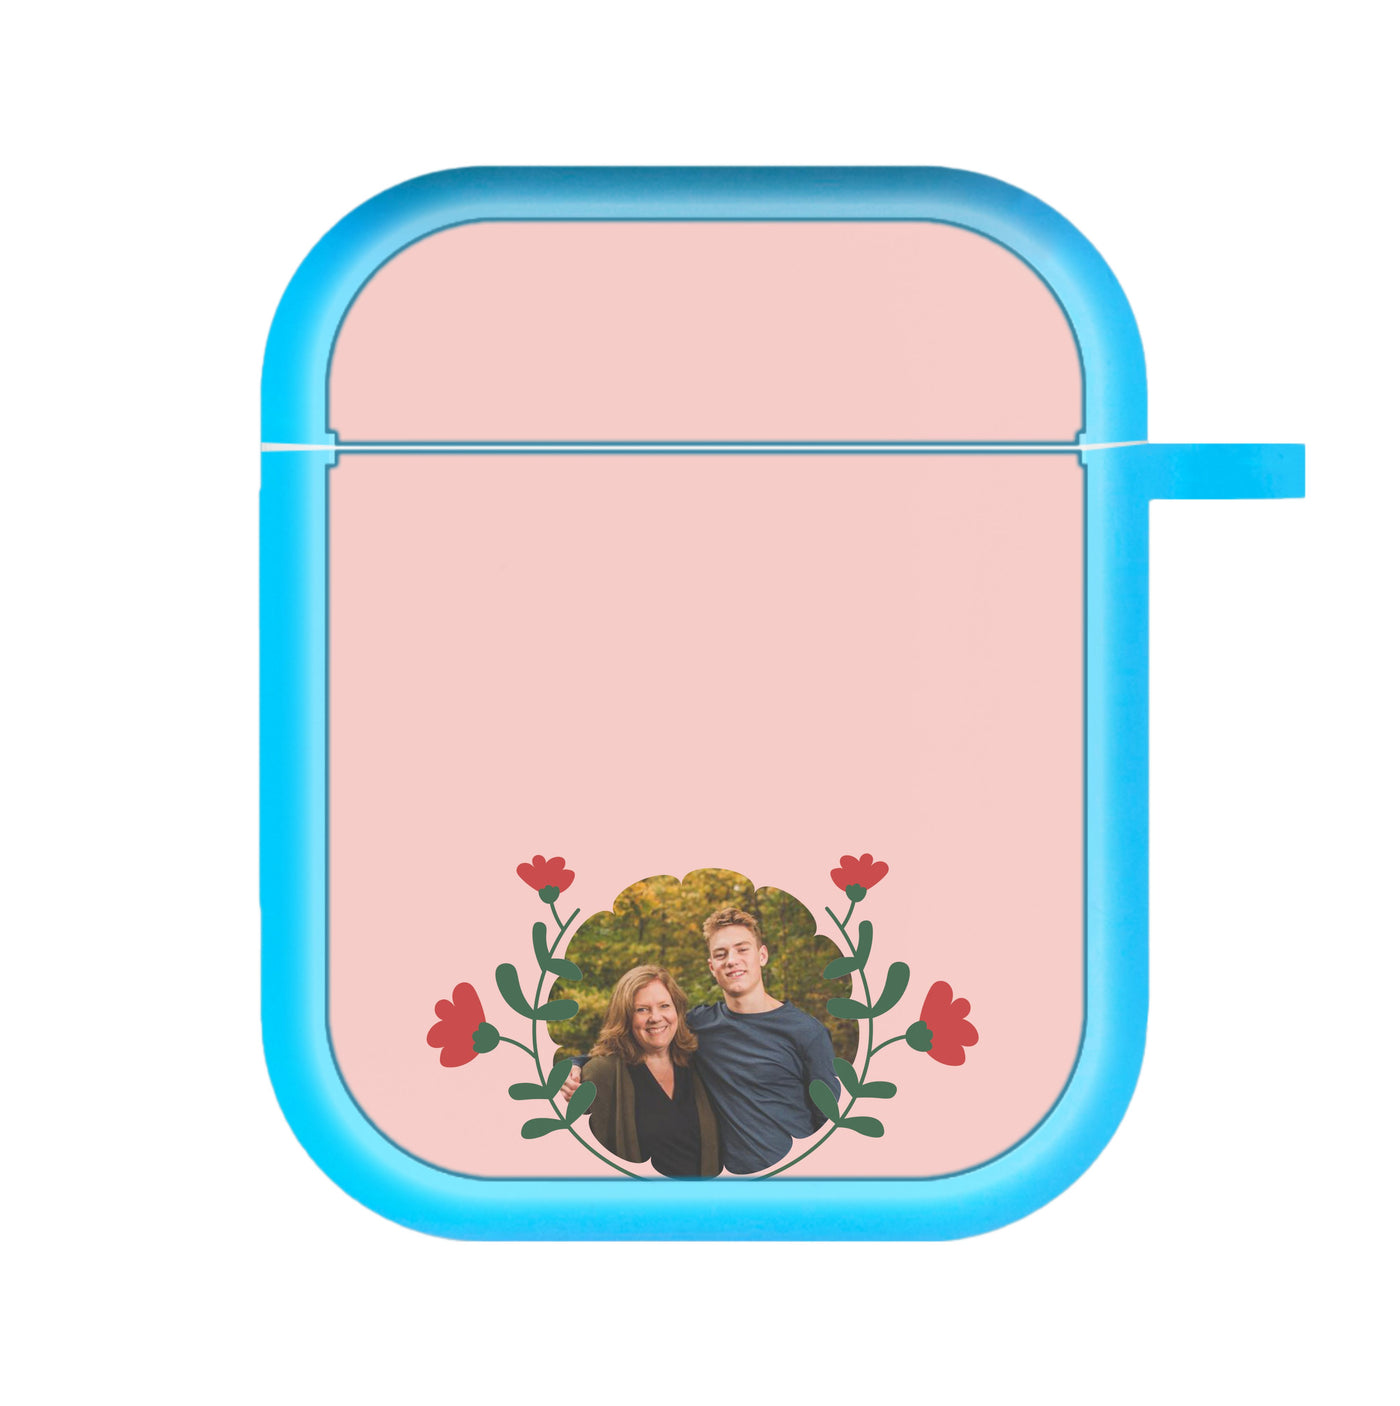 Red Flowers - Personalised Mother's Day AirPods Case